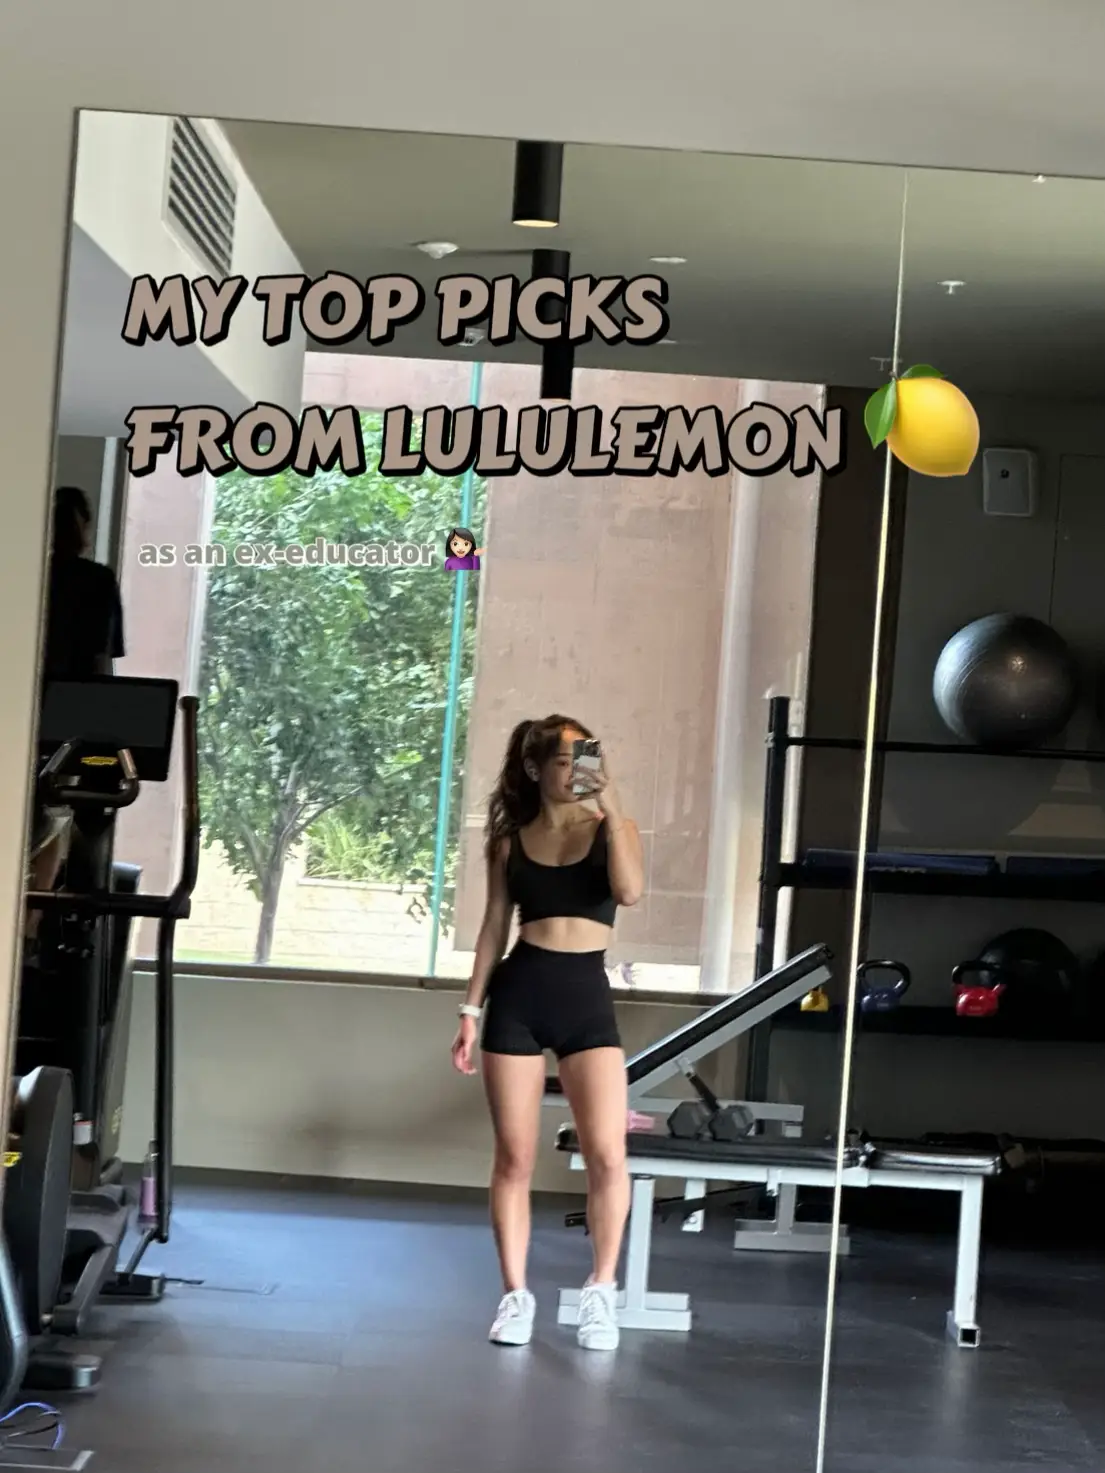 Lulu in Action: Everyone's posts have inspired me to get after it today!  ft. surge shorts and energy bra, details inside. : r/lululemon